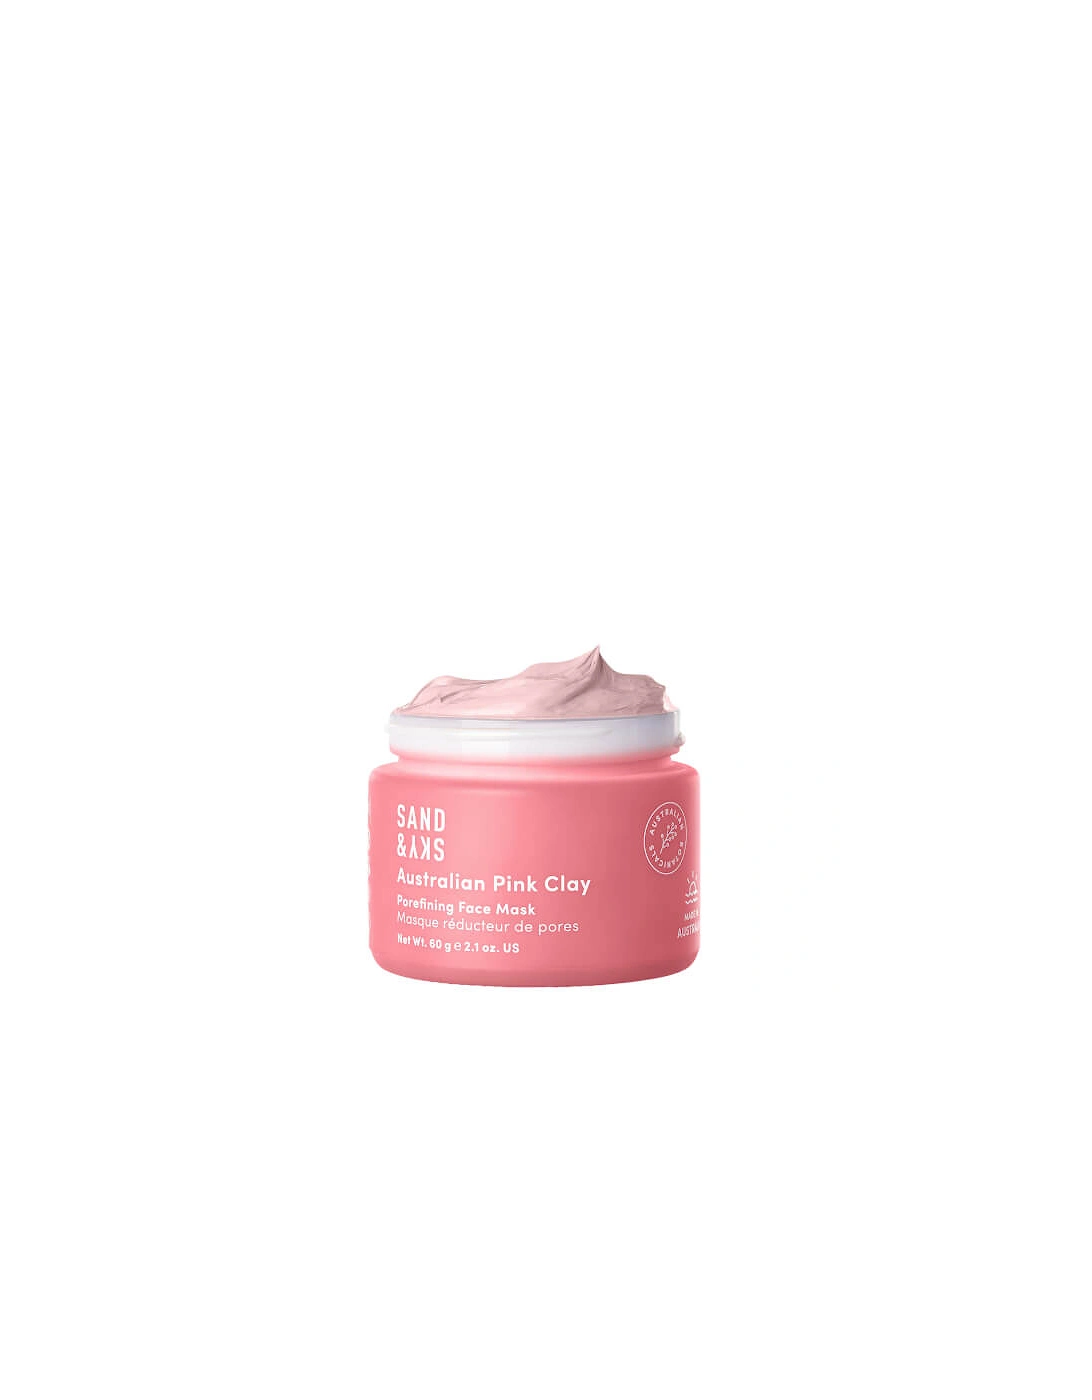 Brilliant Skin Purifying Pink Clay Mask 60g, 2 of 1